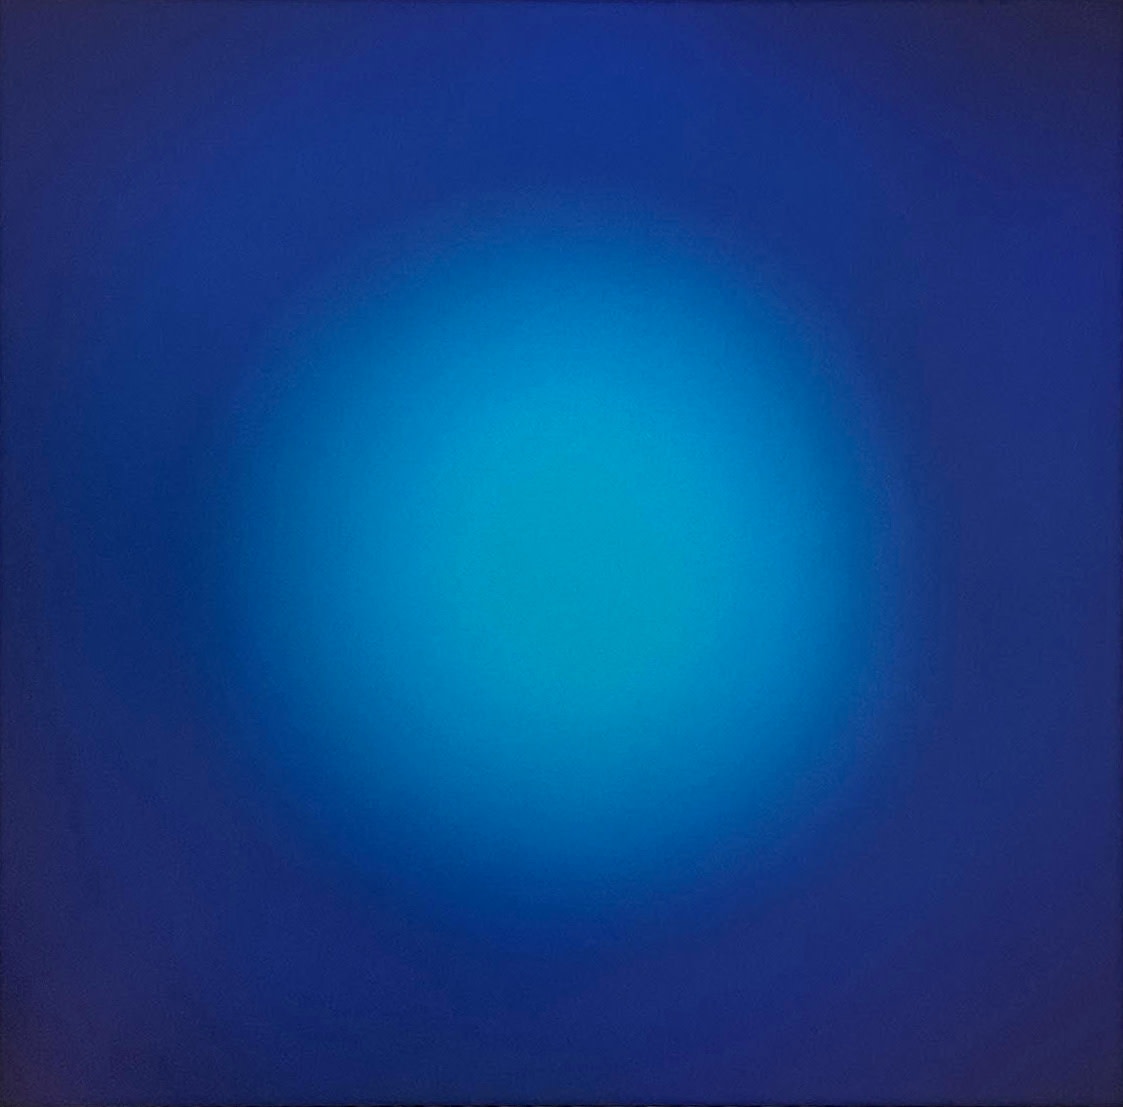 Bill Armstrong, Blue Sphere #437, 2002